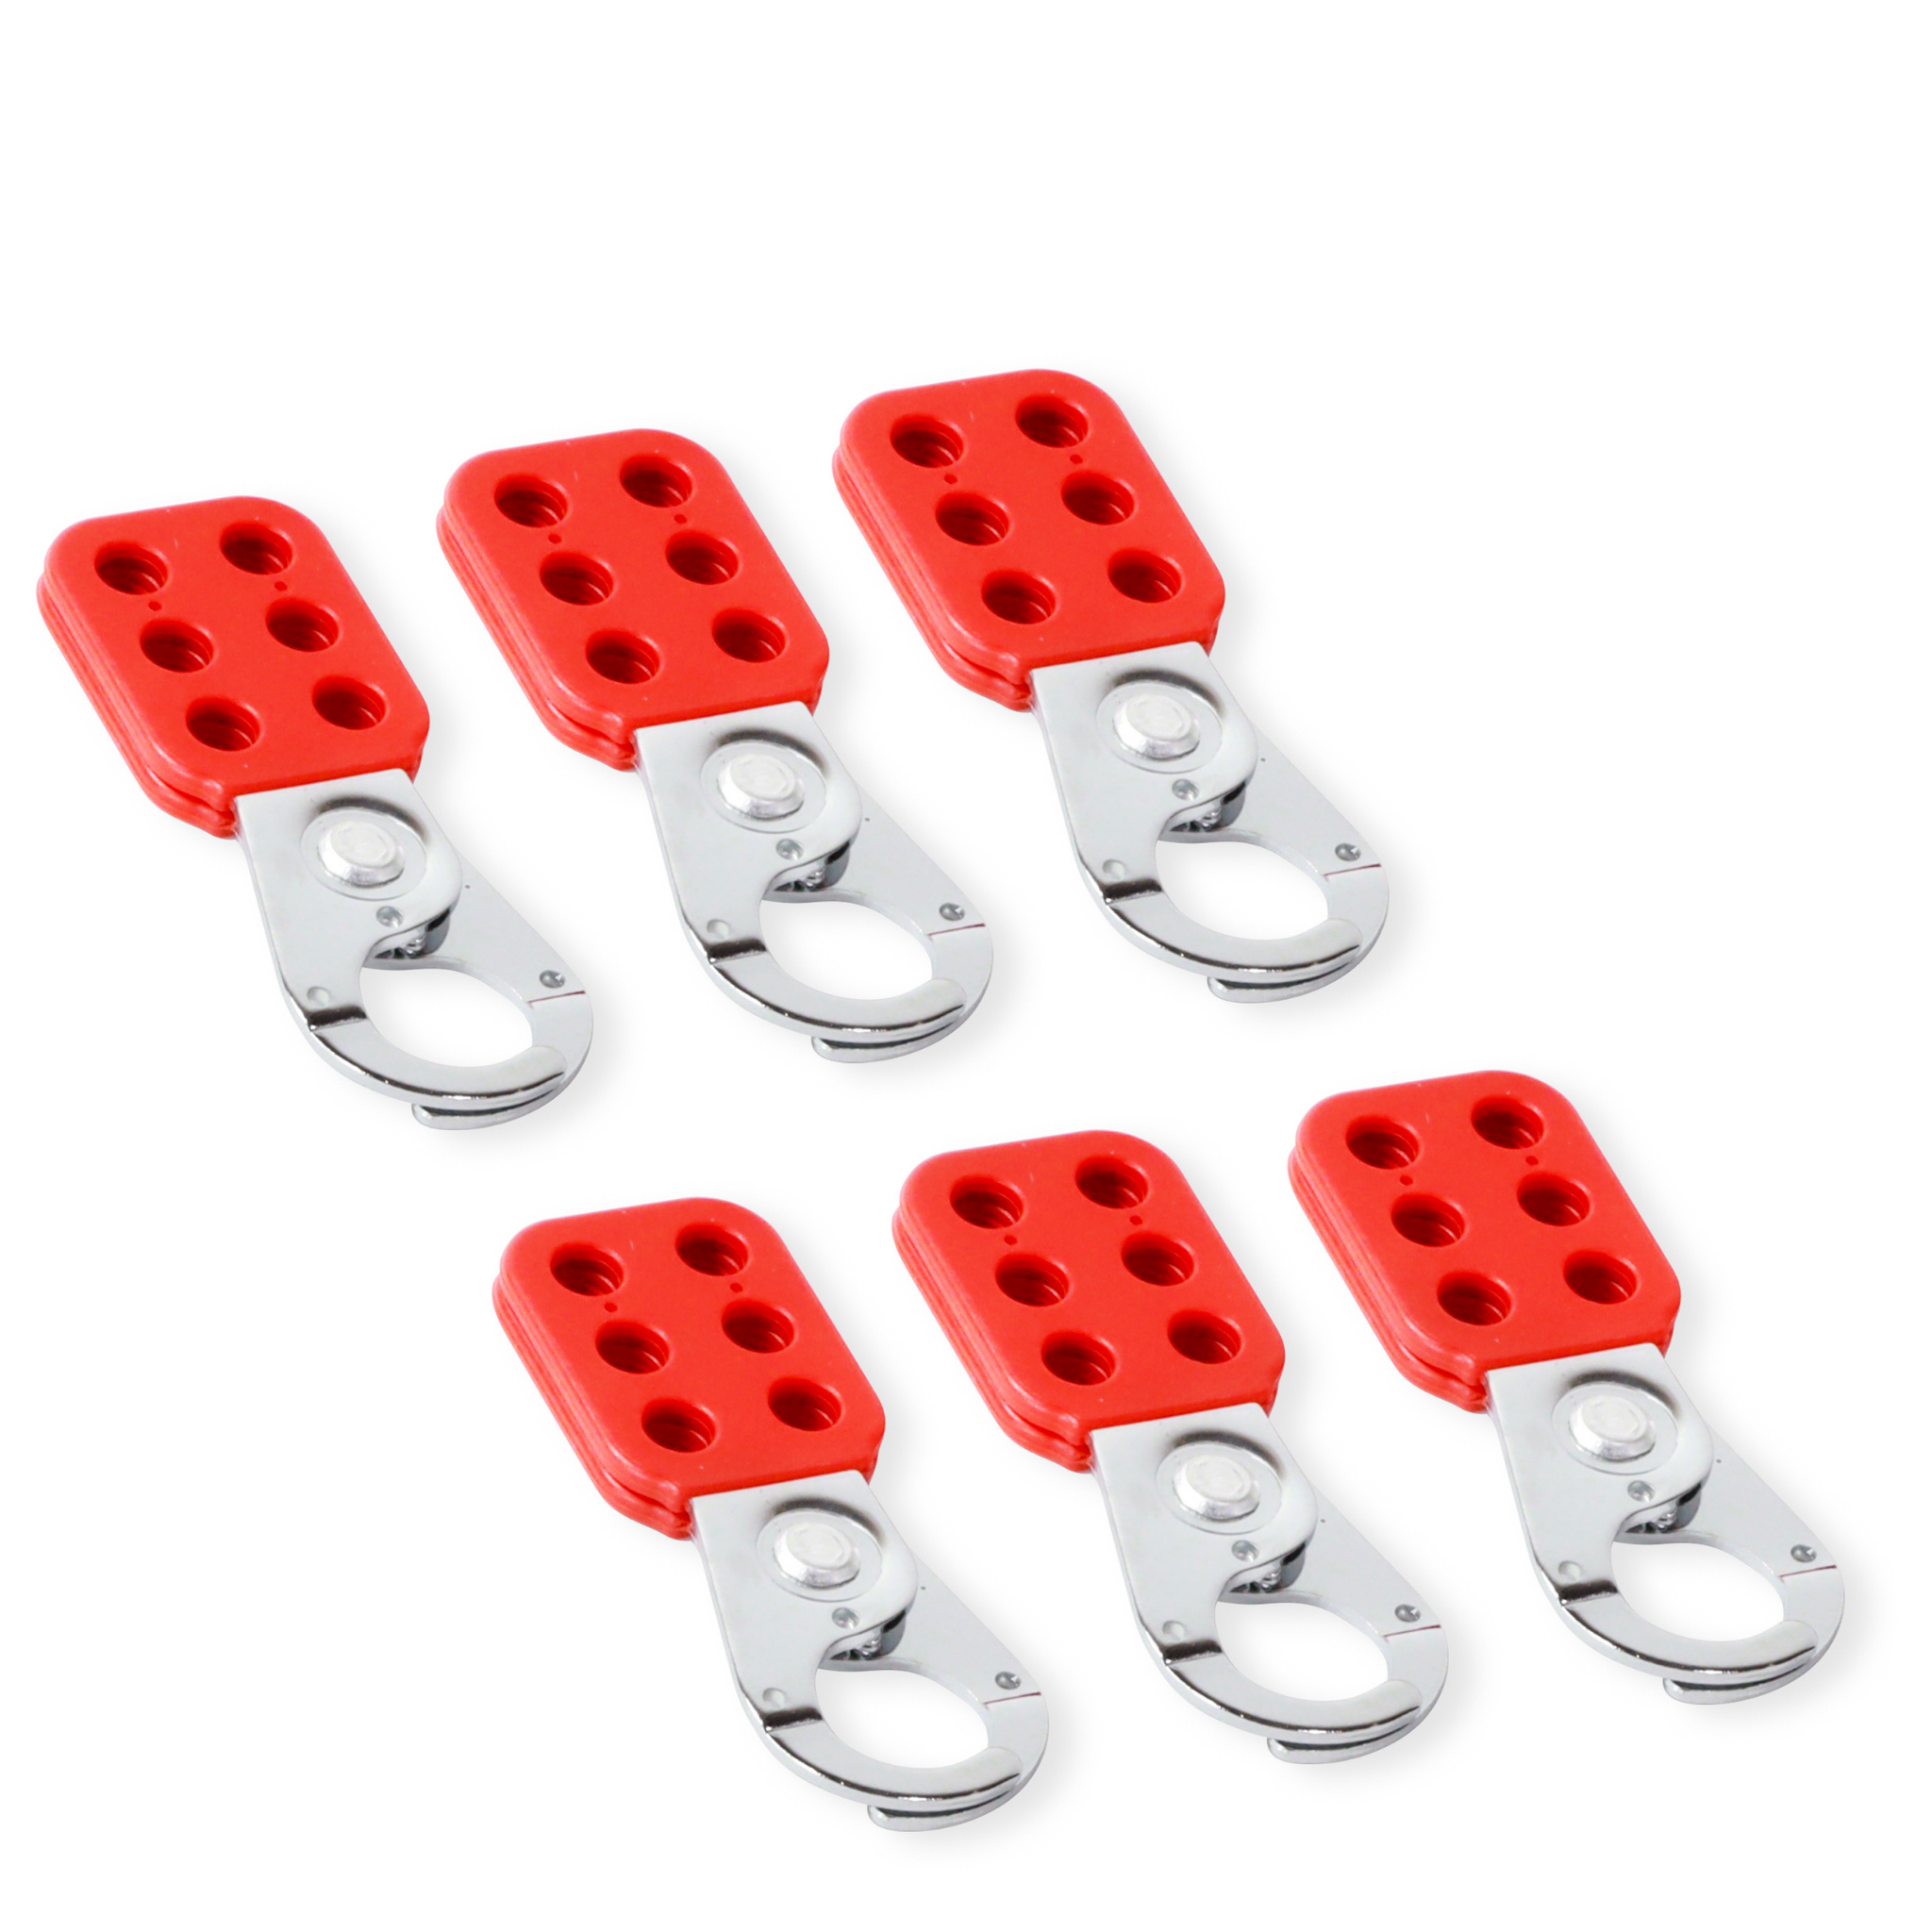 Lockout Tagout Hasp – Nylon and Steel, 1" Jaw Diameter, 6 Pack